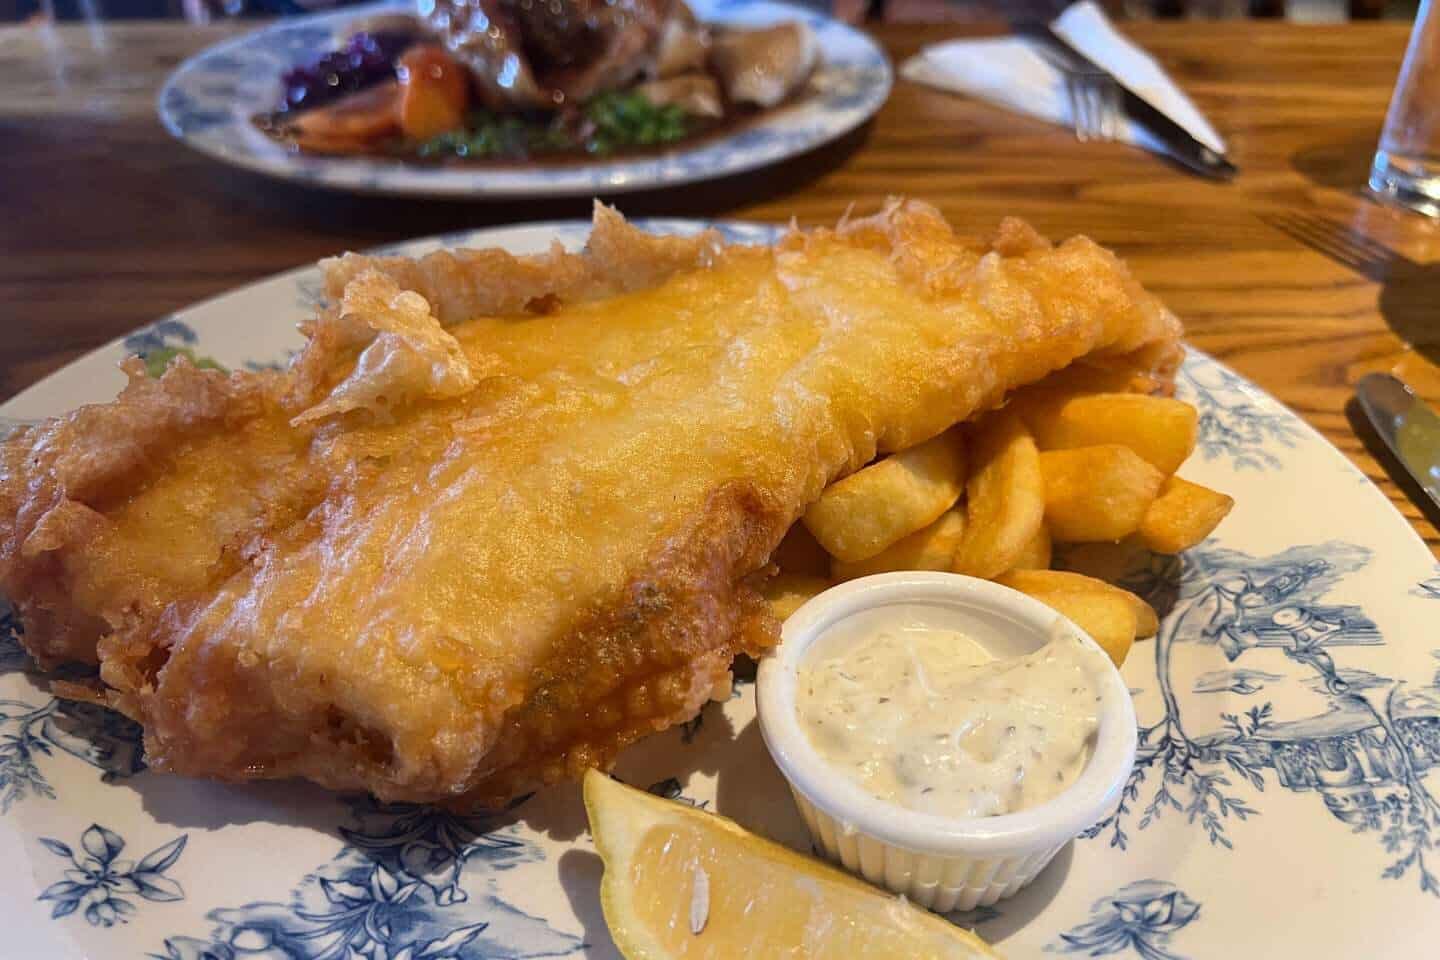 pub meal of fish and chips